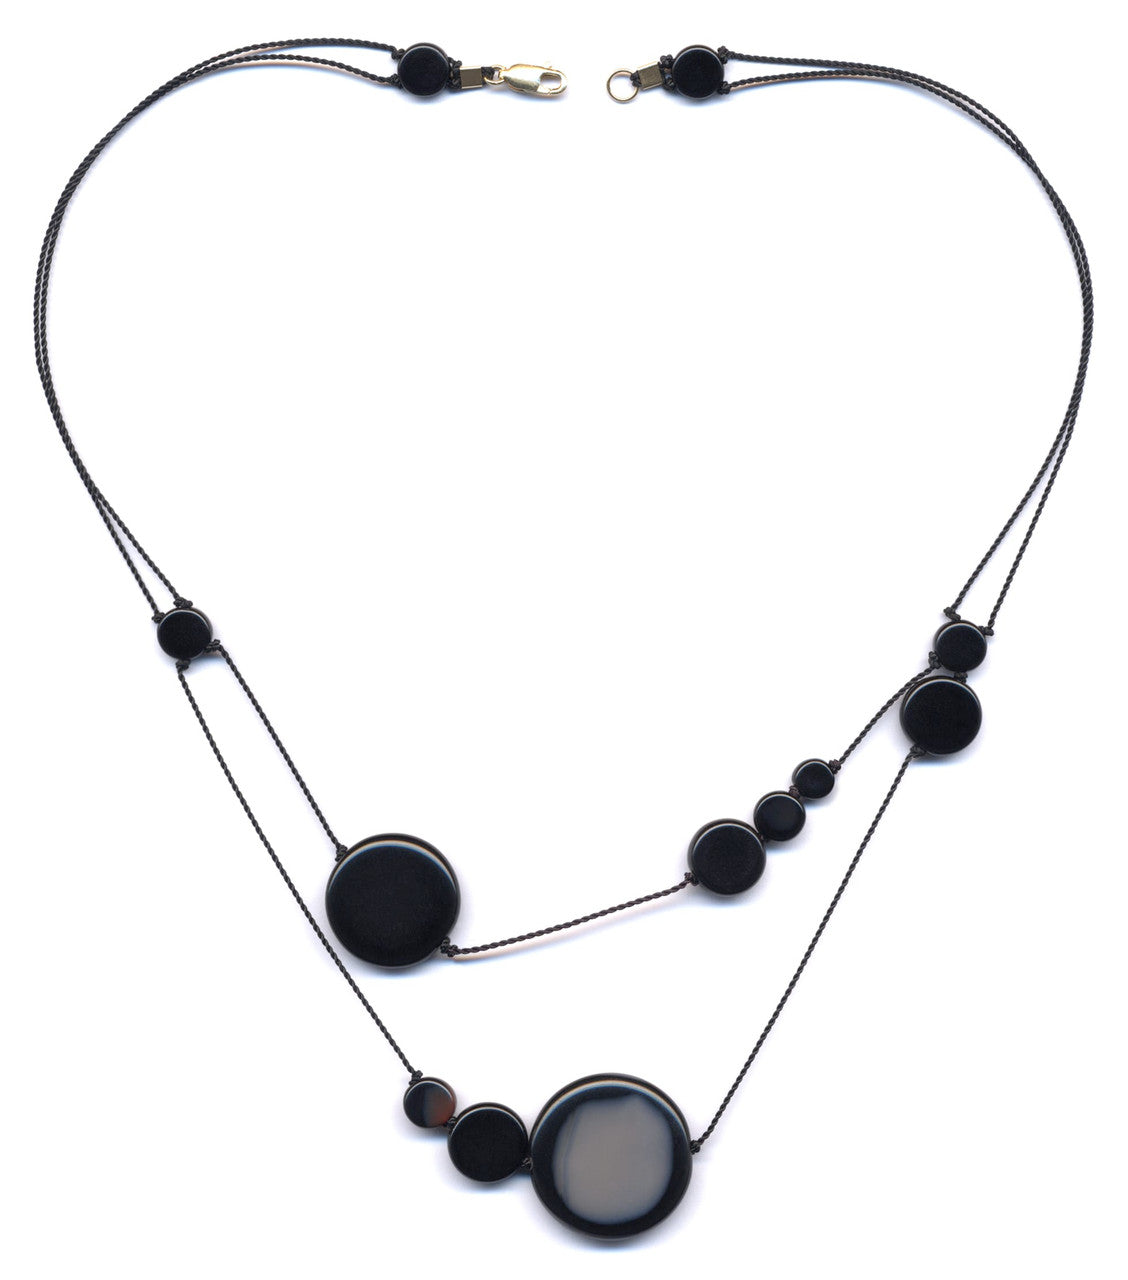 irk-n1615 Necklace by I. Ronni Kappos  (IRK Jewelry)